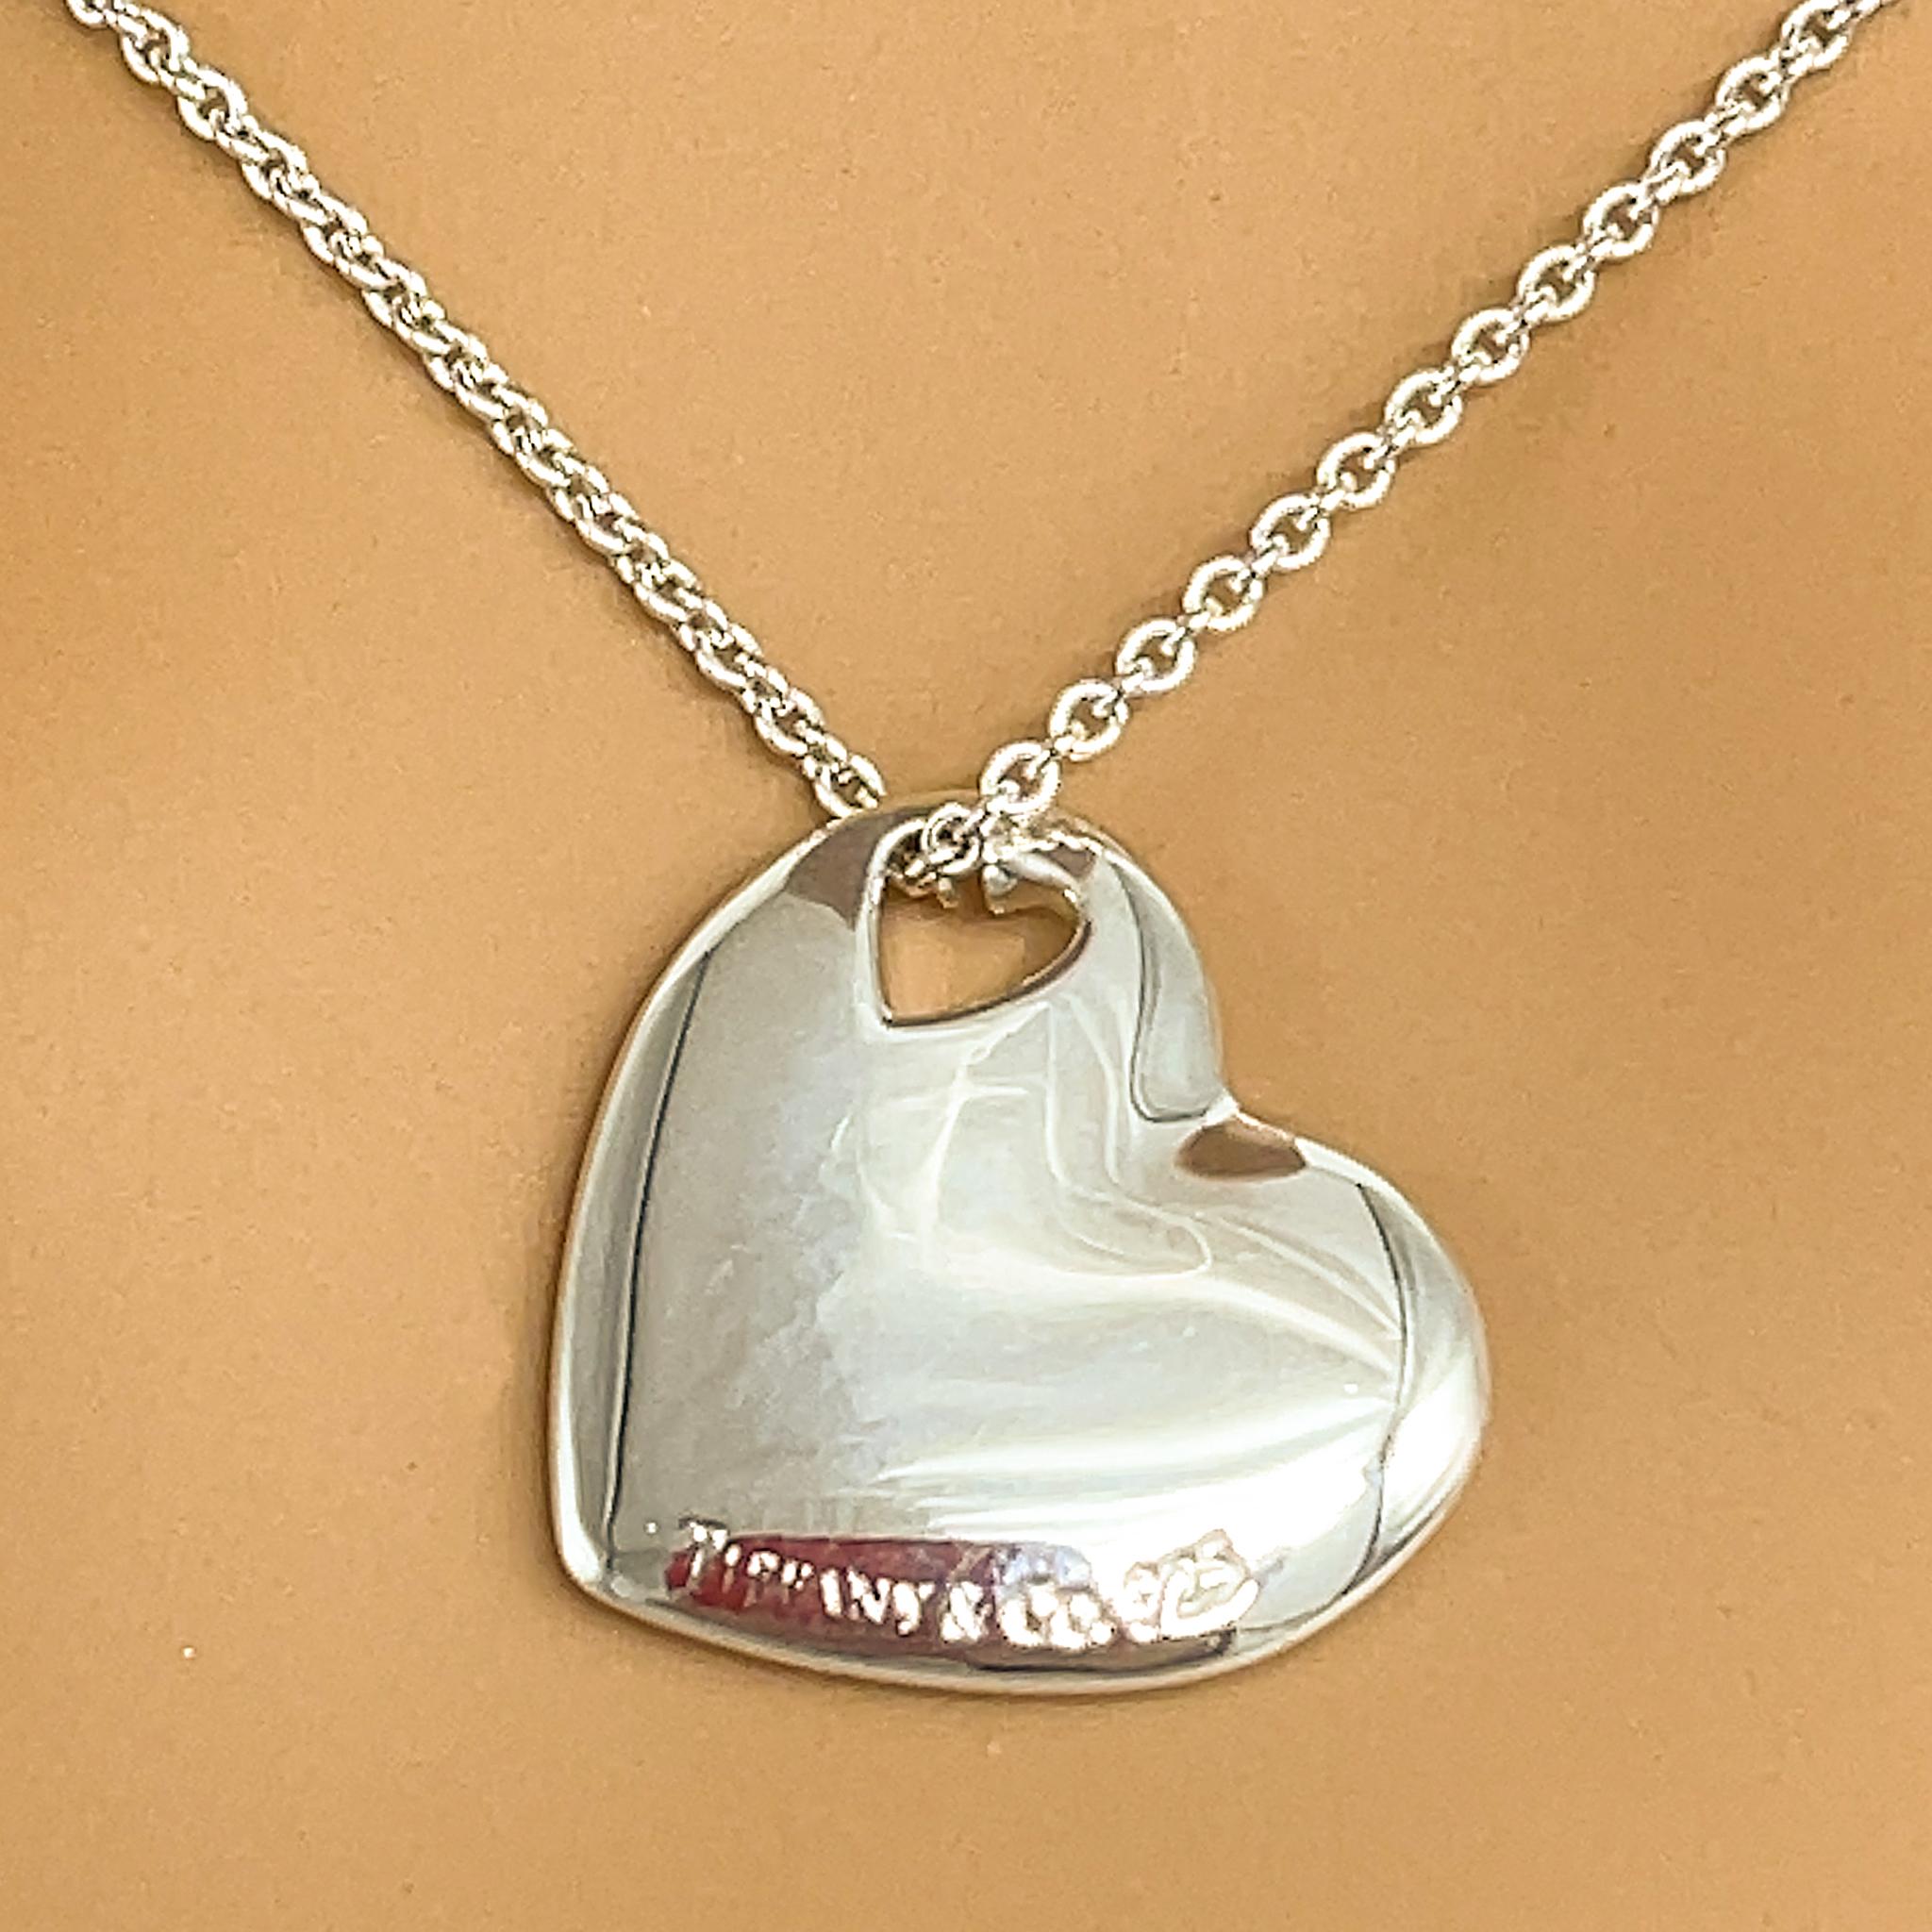 Tiffany and Co. Sterling Silver Cutout Heart Pendant Necklace 5